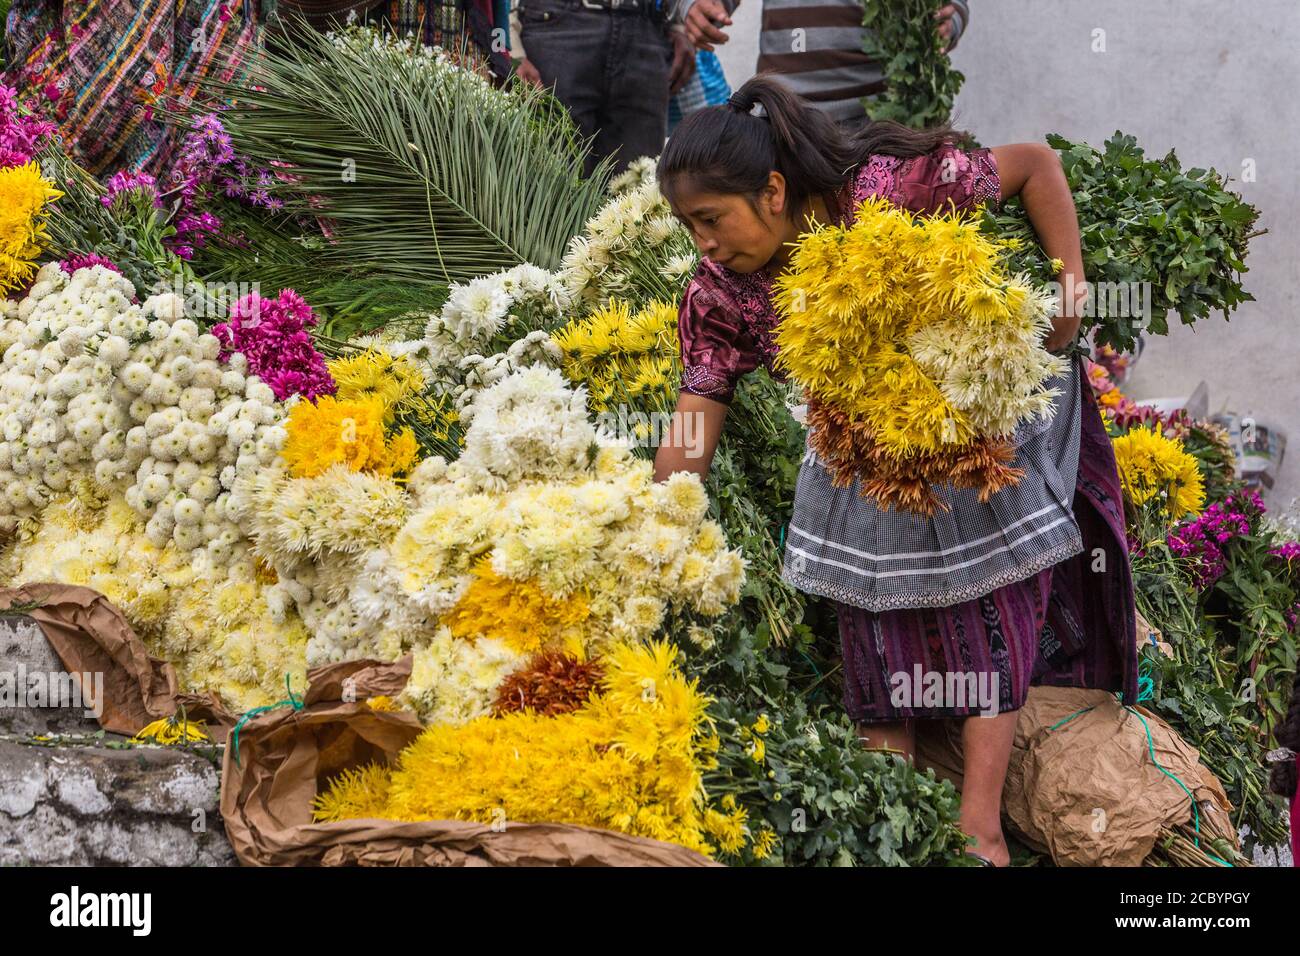 A Quiche Mayan woman sells flowers in the flower market on the pre-Hispanic Mayan steps in front of the Church of Santo Tomas in Chichicastenango, Gua Stock Photo